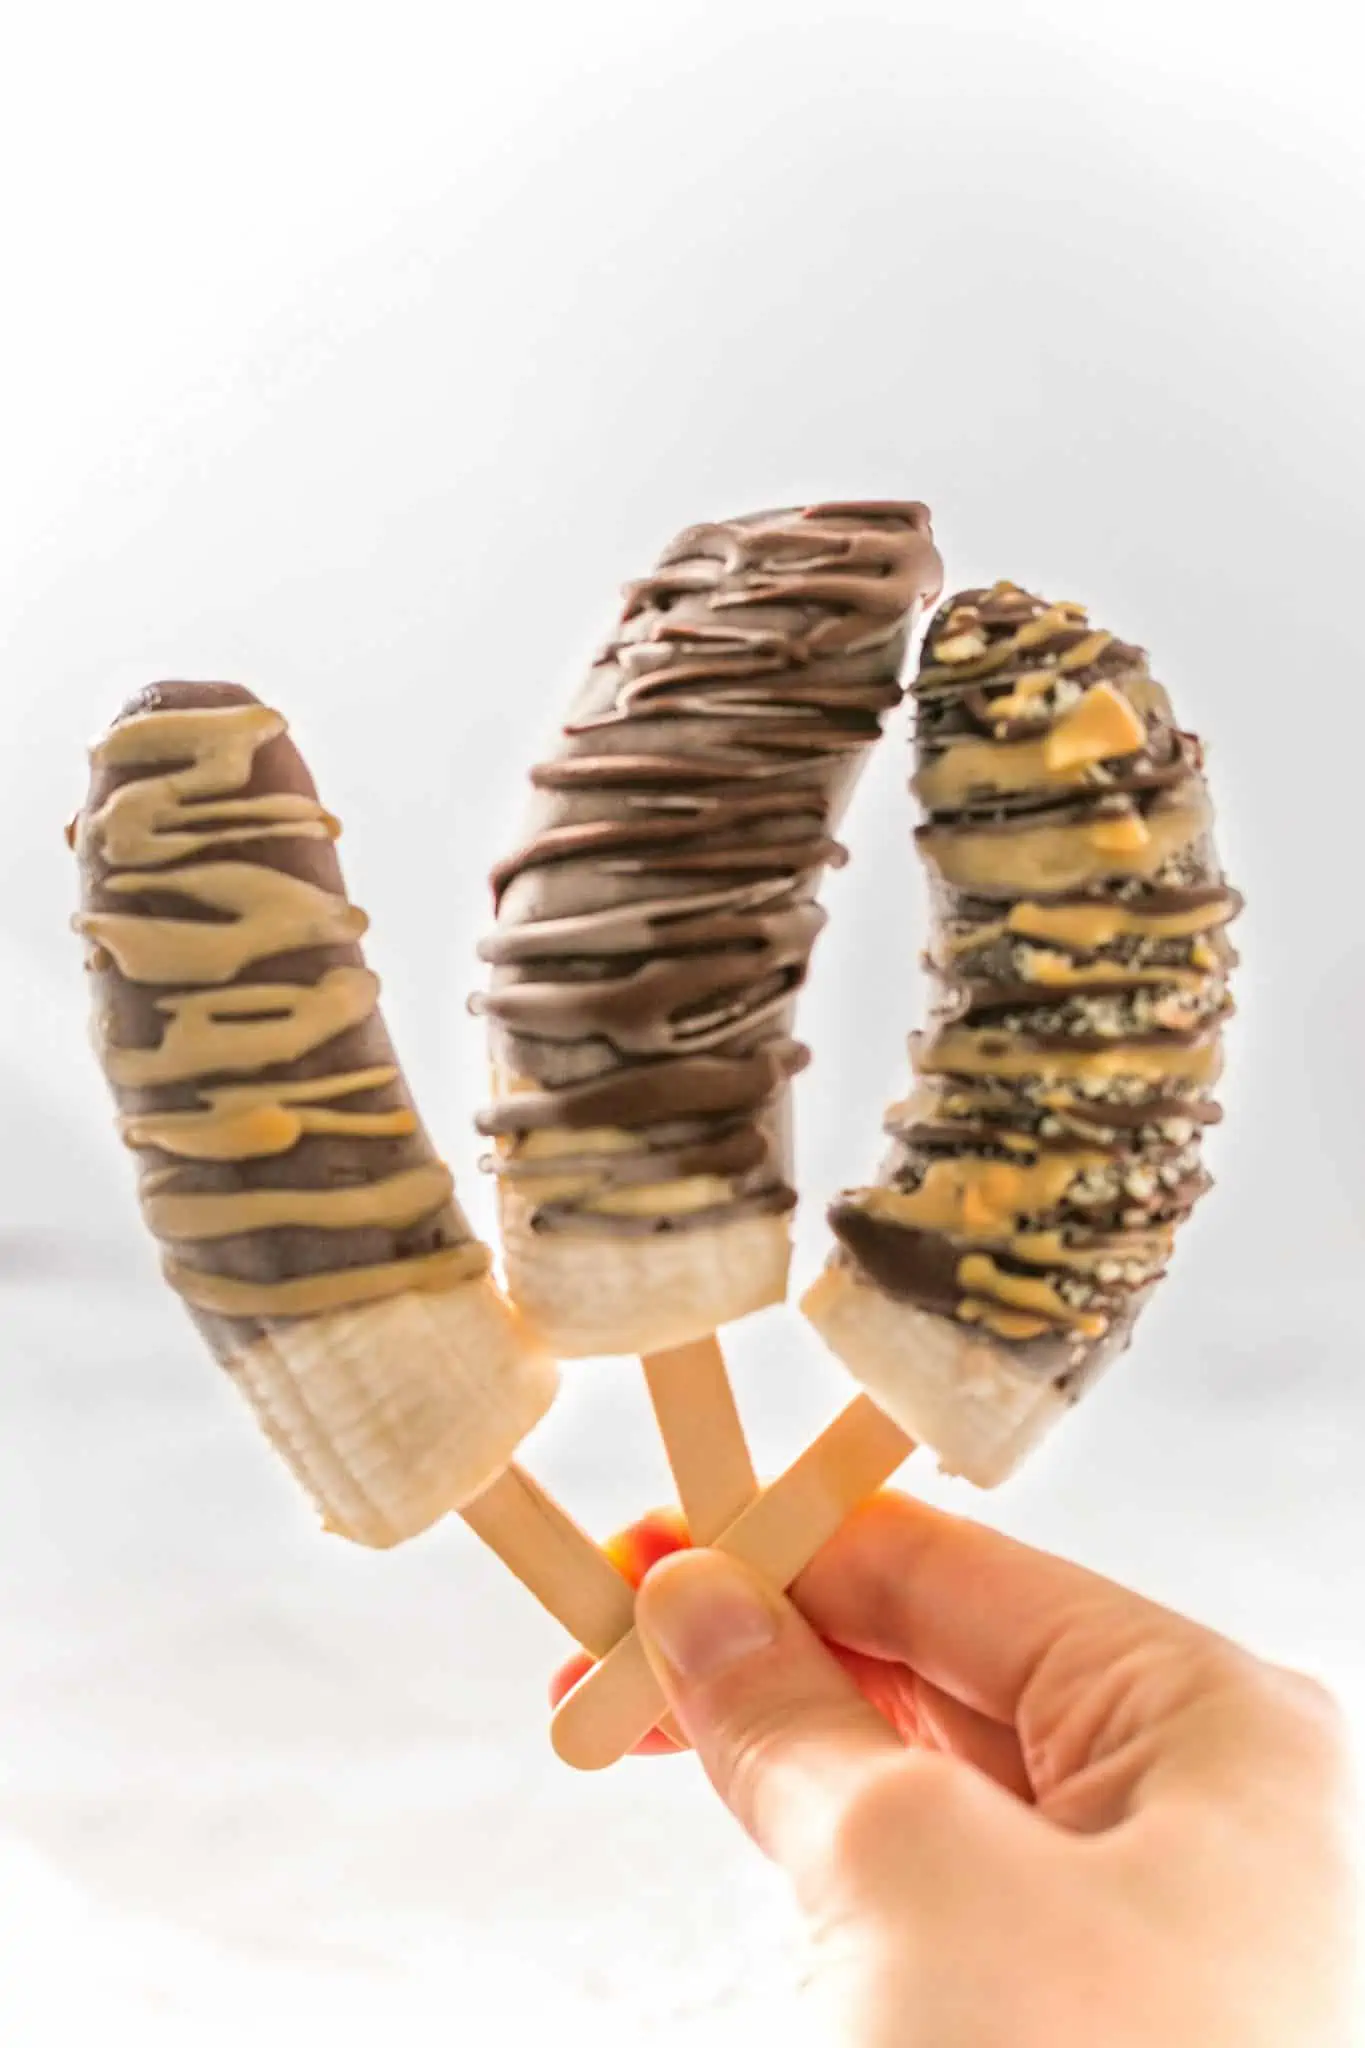 Hand holding three banana popsicles dipped in chocolate.